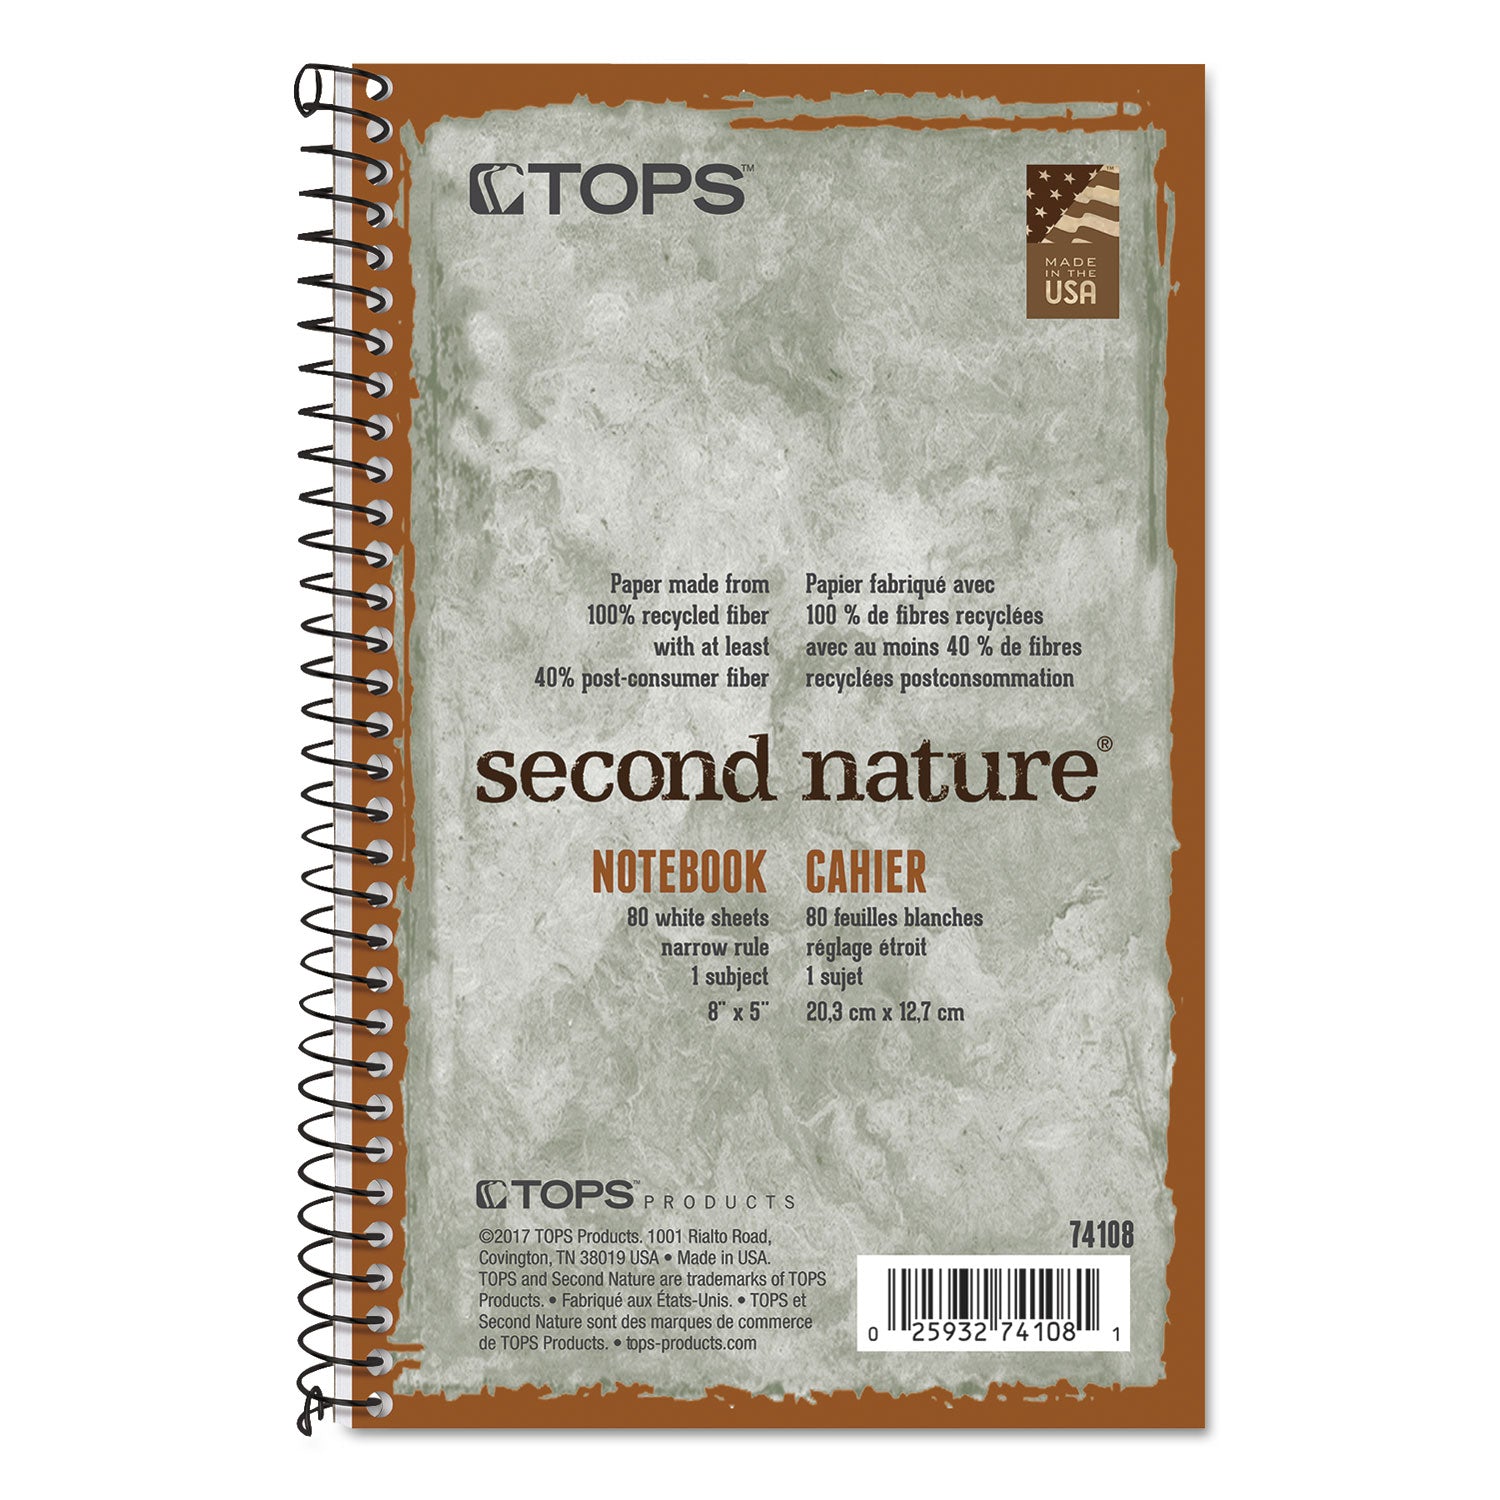 Second Nature Single Subject Wirebound Notebooks, Narrow Rule, Green Cover, (80) 8 x 5 Sheets - 